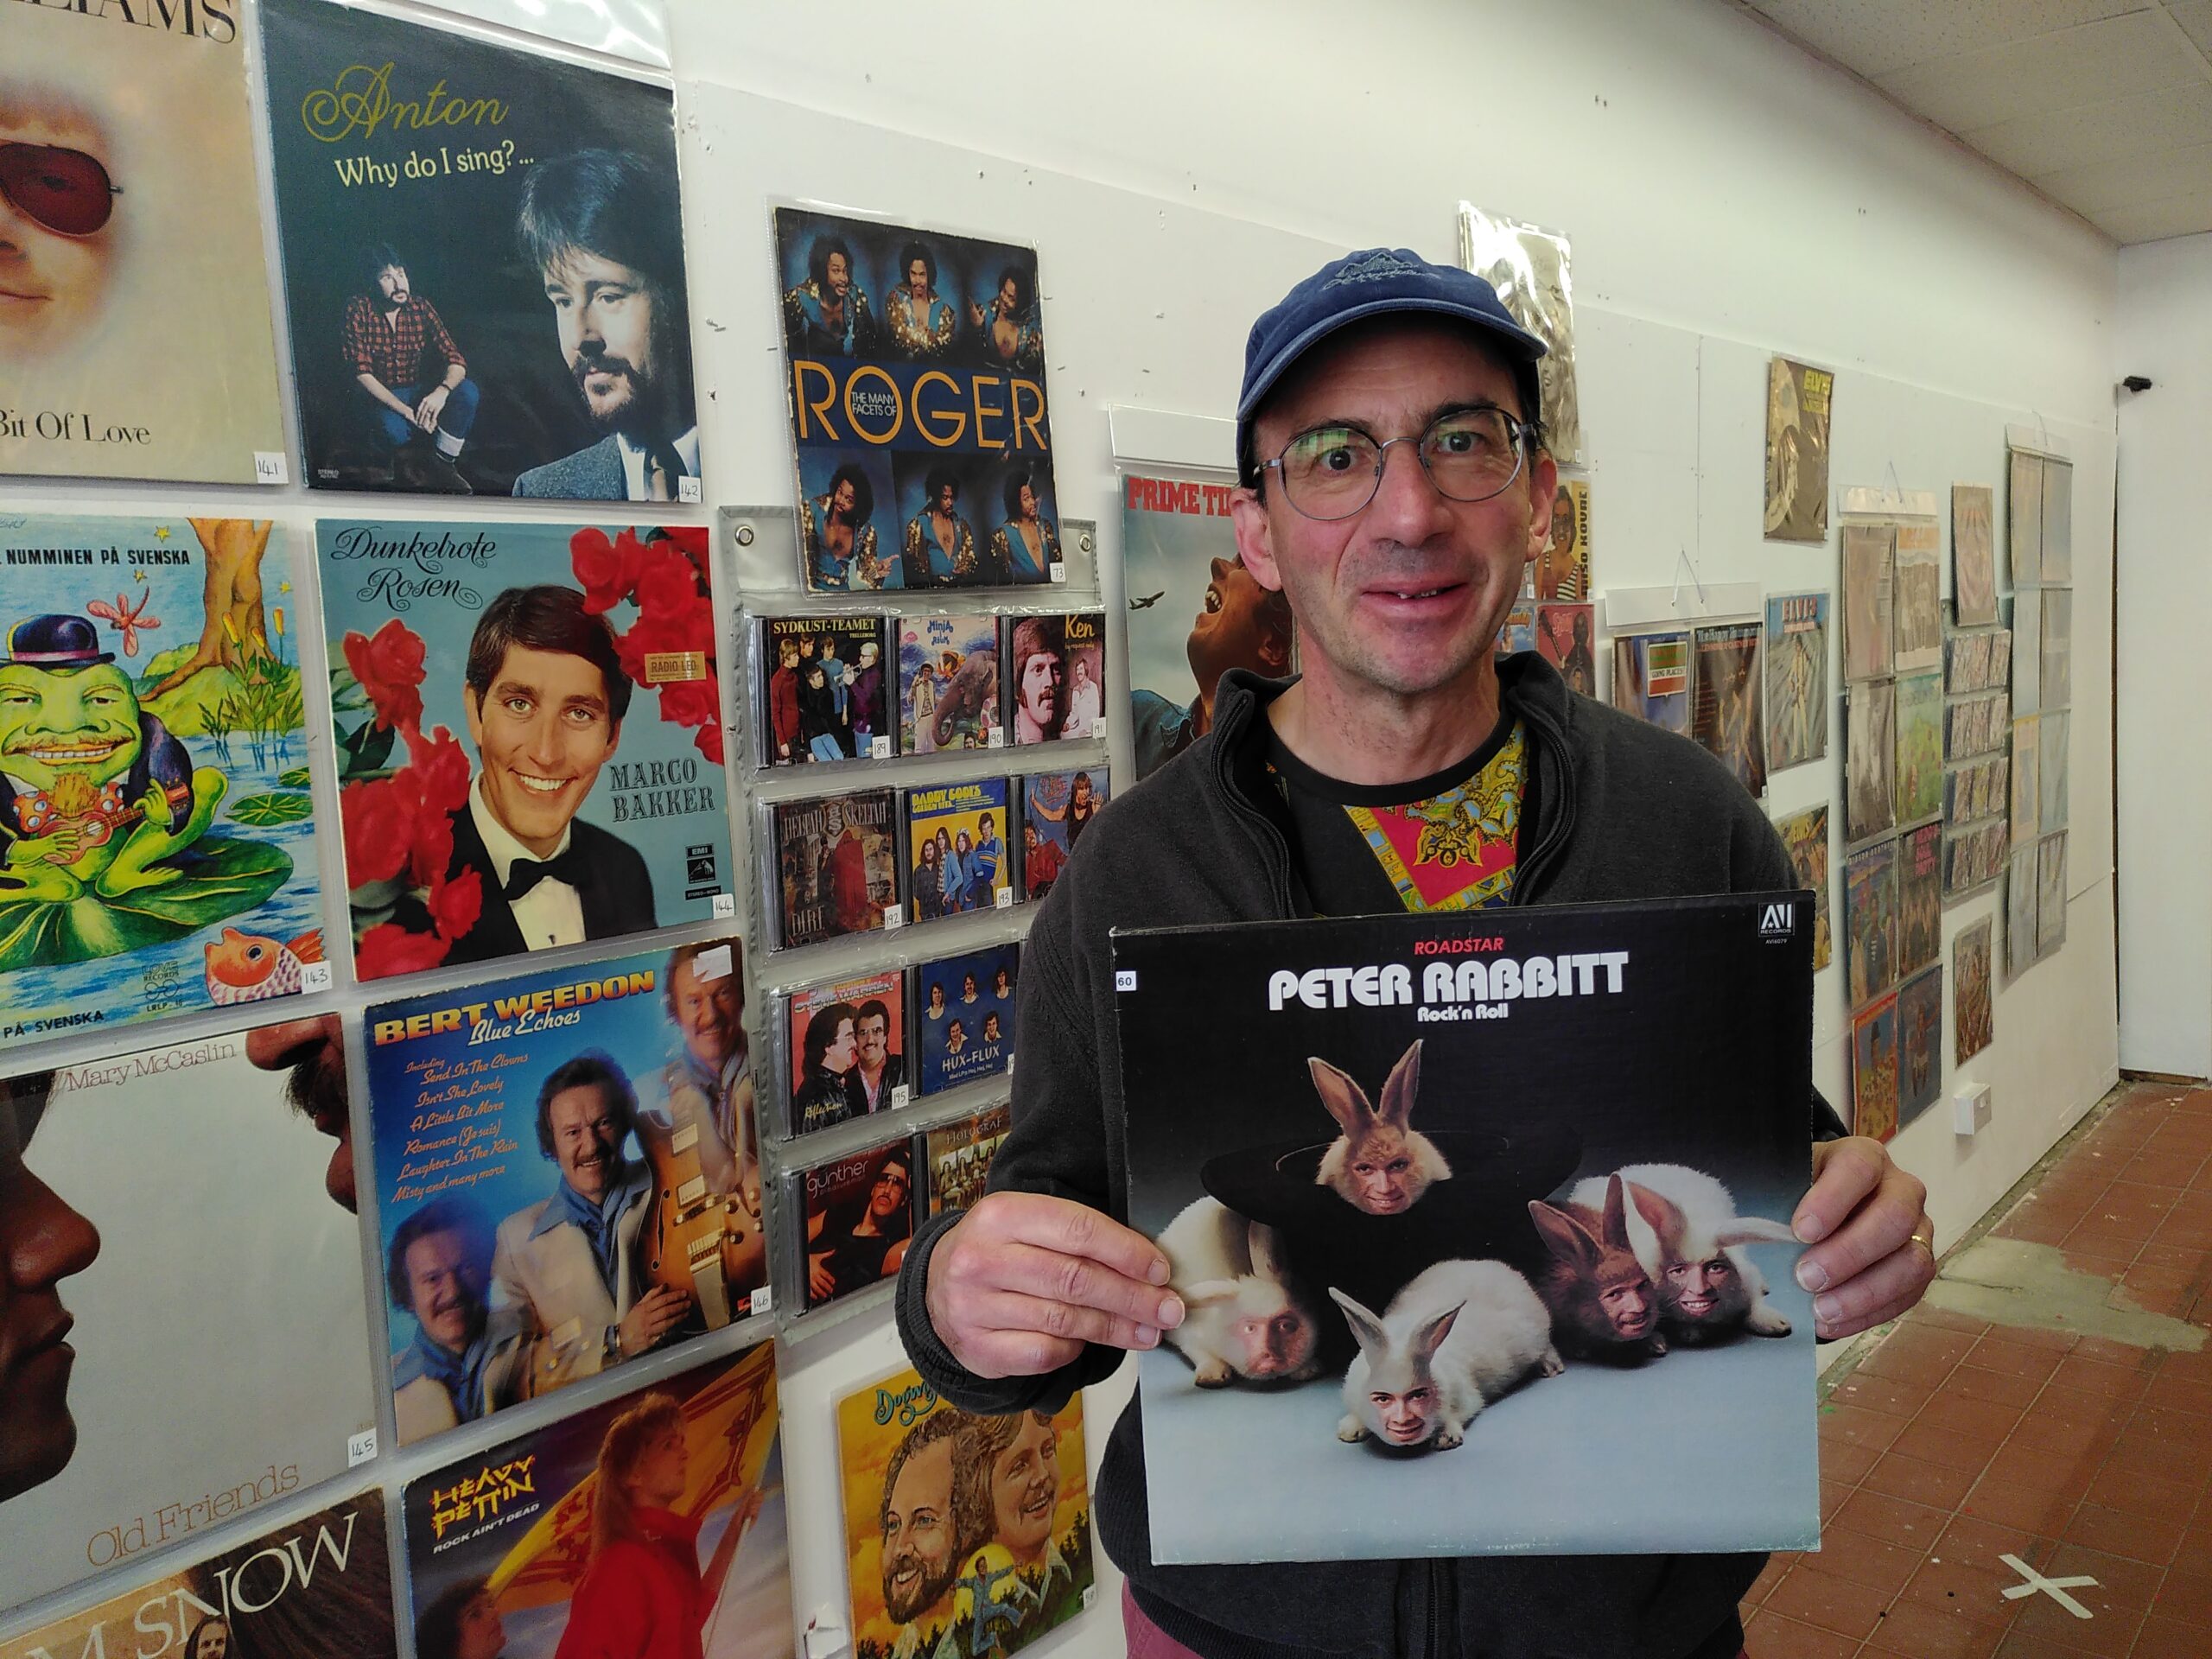 Man stood in a gallery holding an album cover for Roadstar Peter Rabbitt, featuring five rabbits with band members faces superimposed on rabbits' heads.